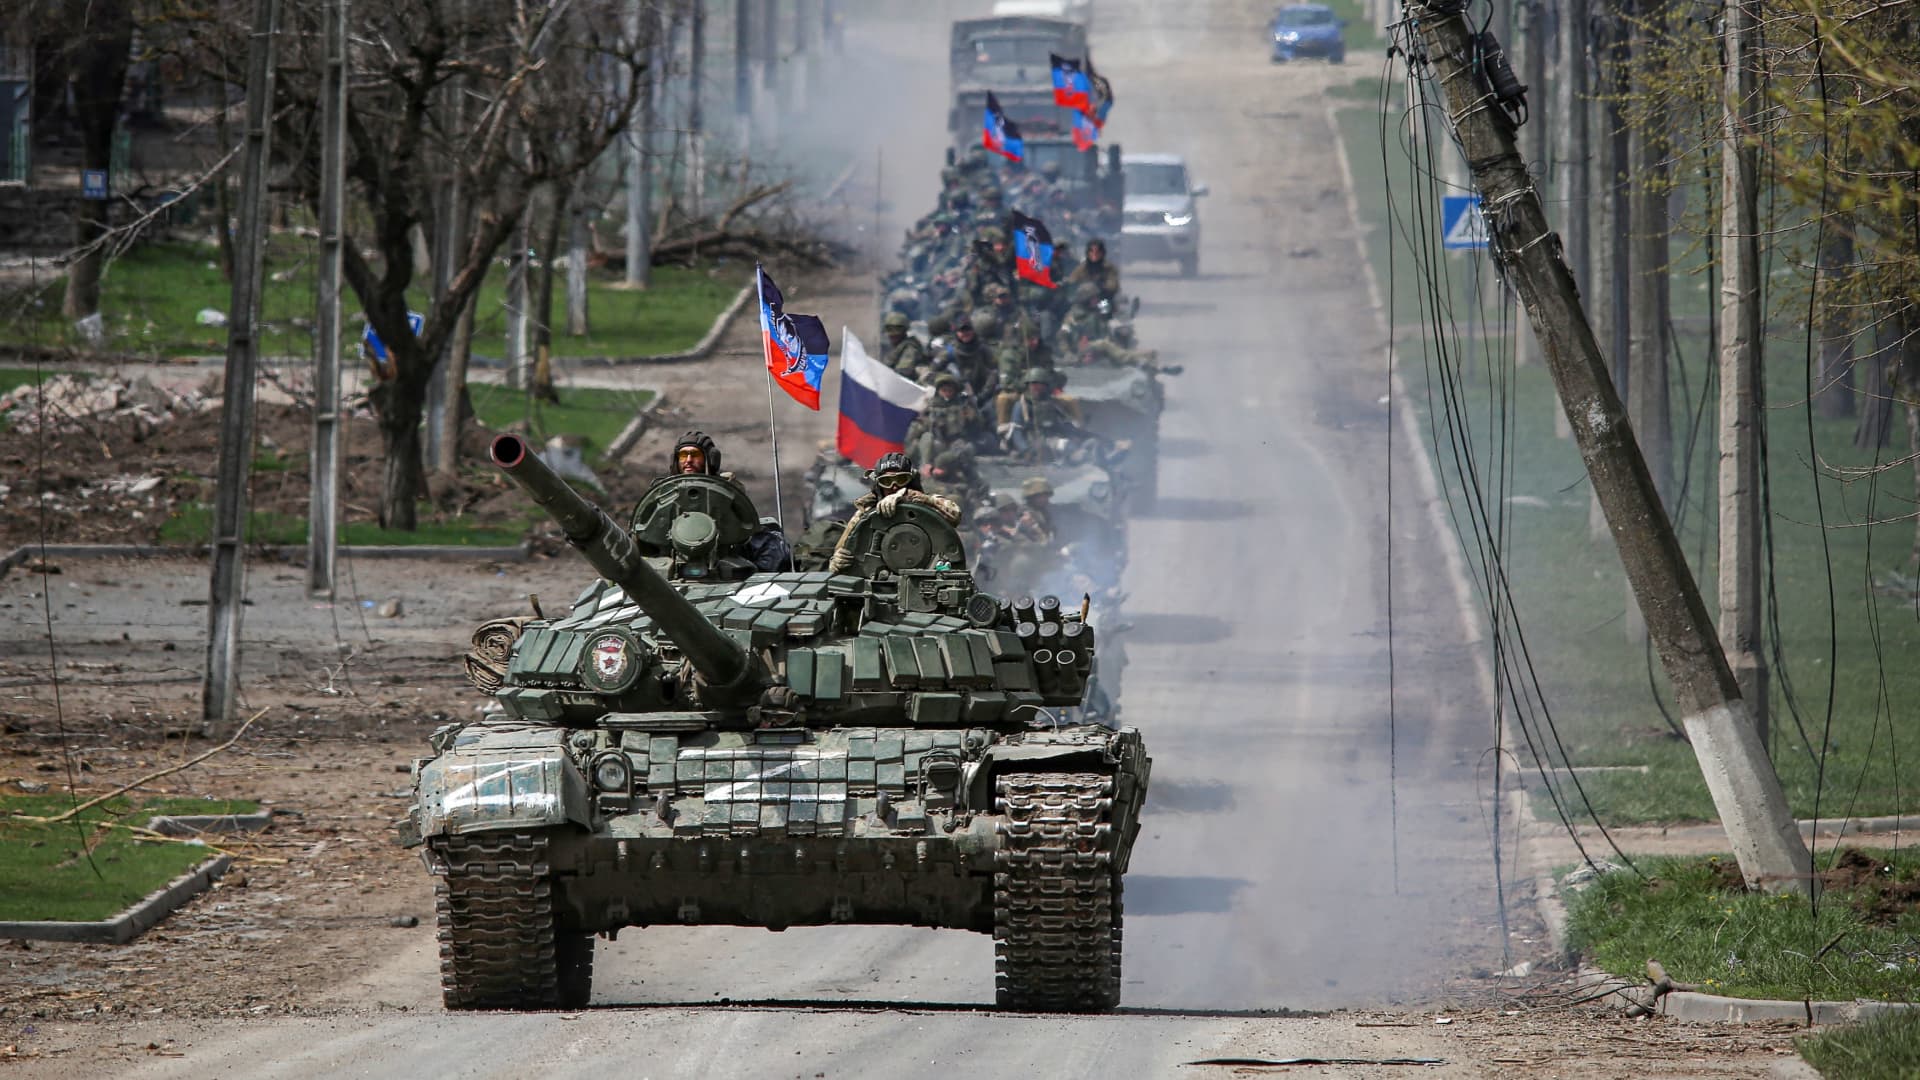 An armored convoy of pro-Russian troops moves along a road during the Ukraine-Russia conflict in the southern port city of Mariupol, Ukraine, on April 21, 2022.